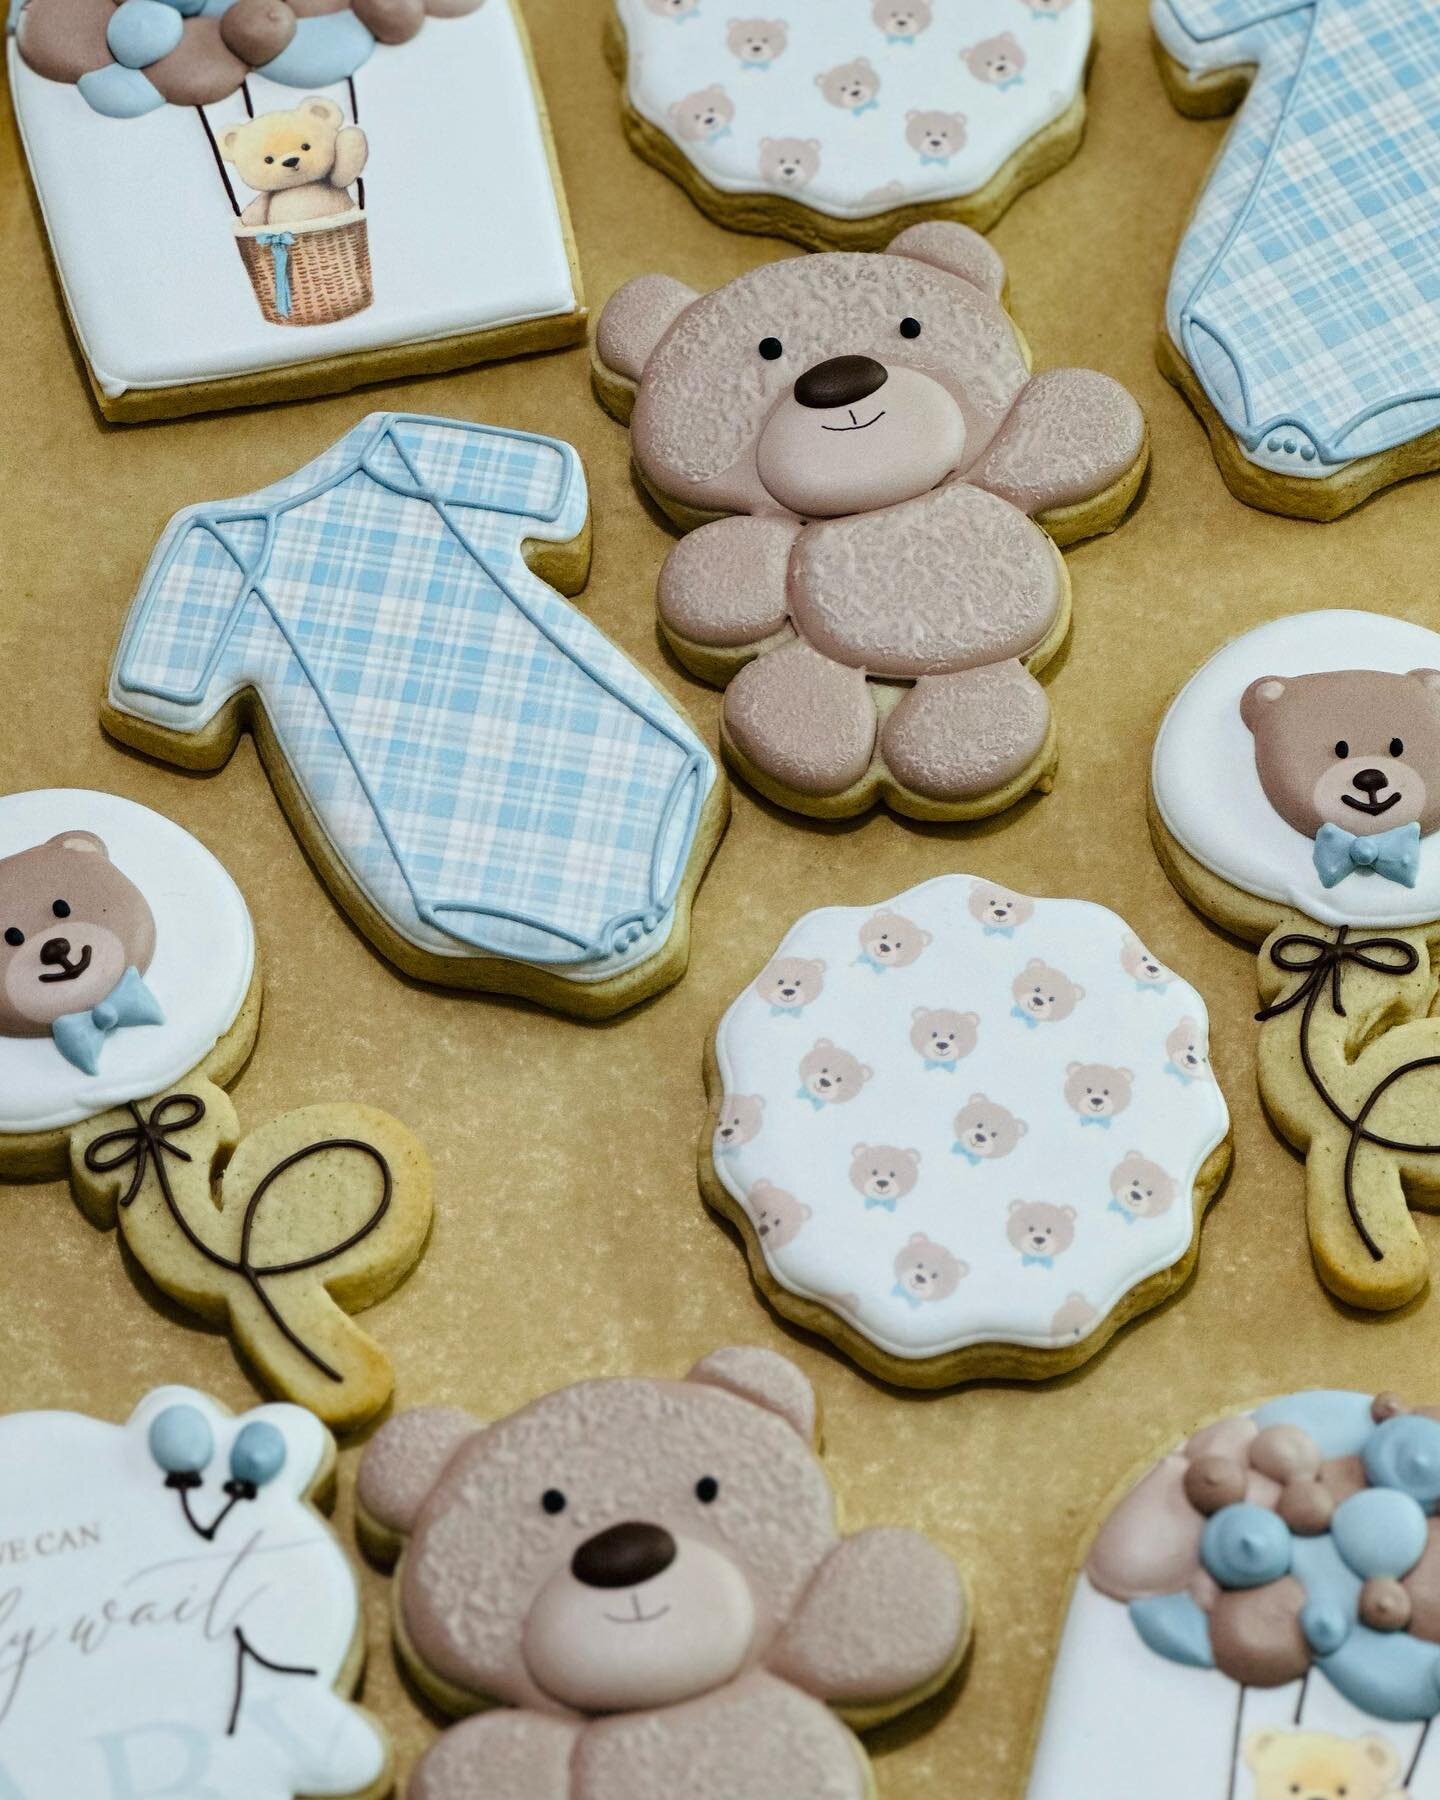 We can bearly wait! Baby shower cookies using the artwork from the invitation as inspiration and to coordinate cookies. #SugarCookies #Homemade #RoyalIcing #CustomCookies #HandDecoratedCookies #DecoratedCookies #DecoratedSugarCookies #CookieArt #Edib